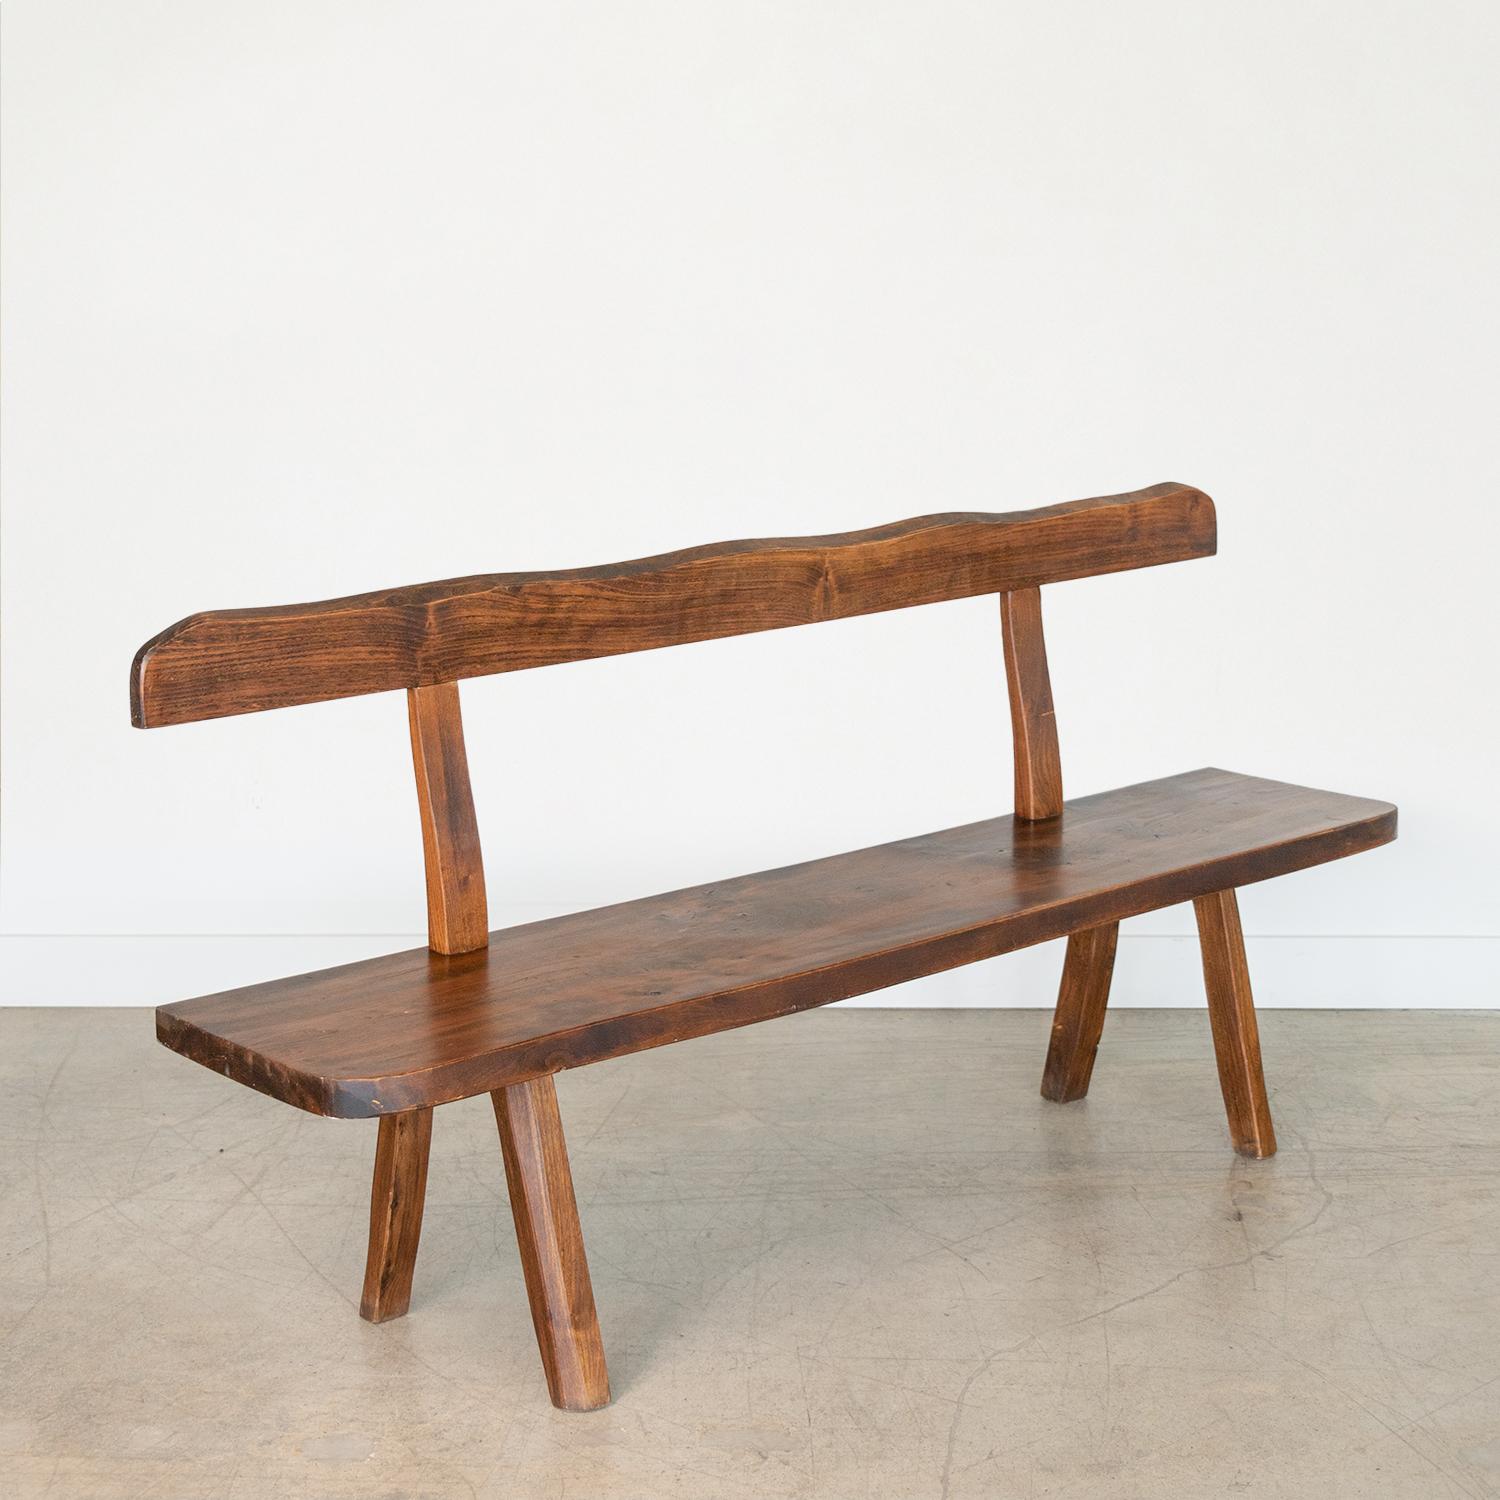 Beautiful elm wood bench by Olavi Hanninen, 1950s. Amazing T-bench Brutalist design with thick wood seat, beautiful slightly wavy wood beam back and chunky angled legs. Original wood finish showing nice age and patina.